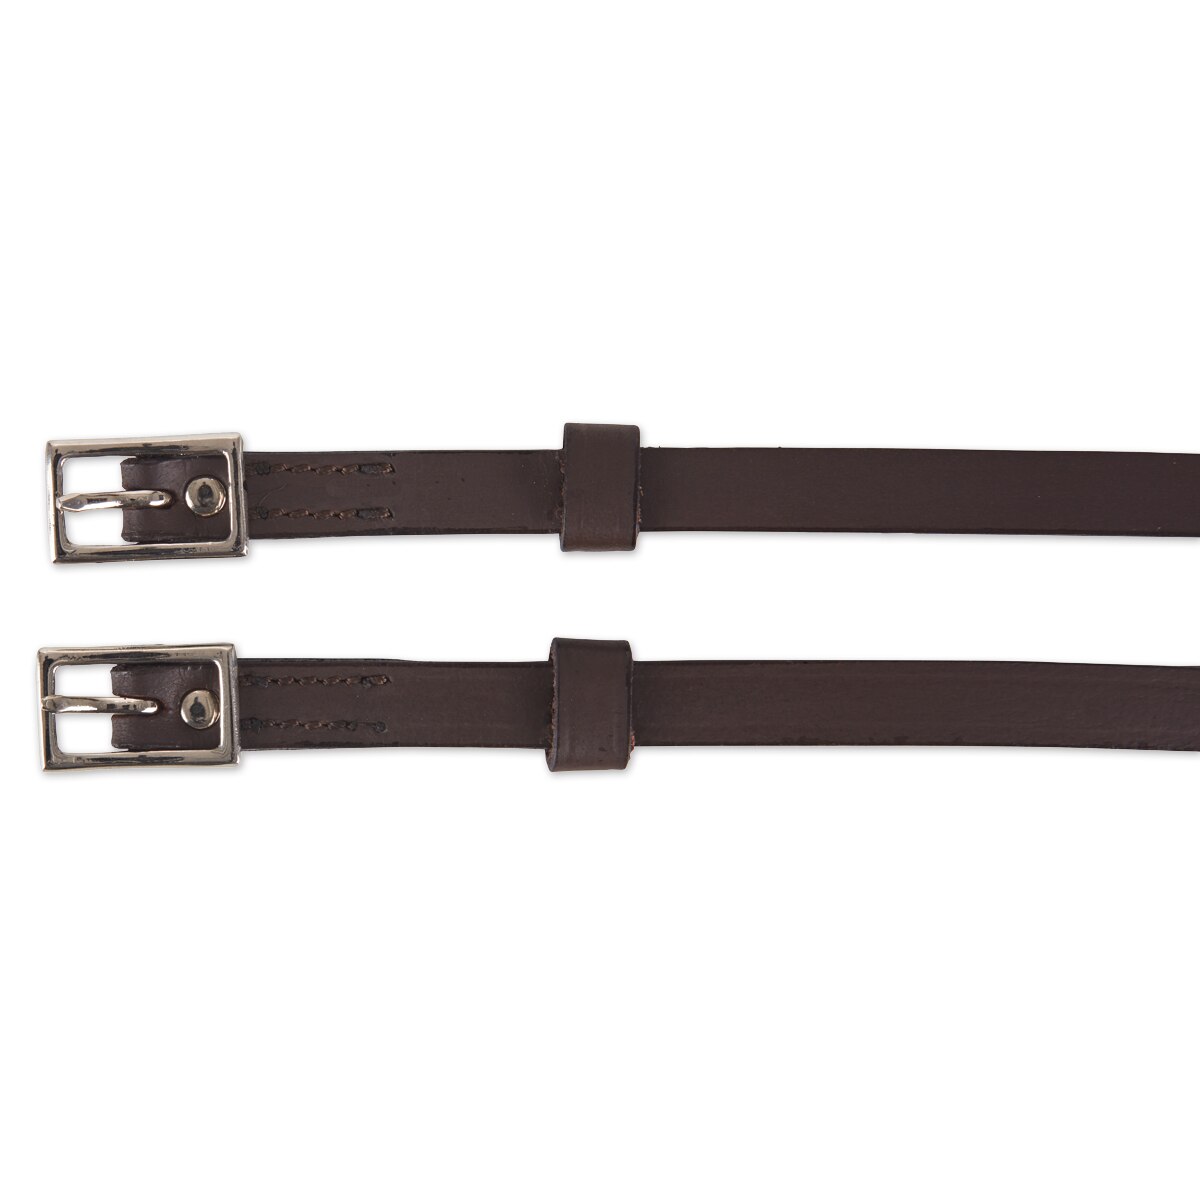 Adult Size Pair Of DARK BROWN Leather Western Basic Spur Straps 